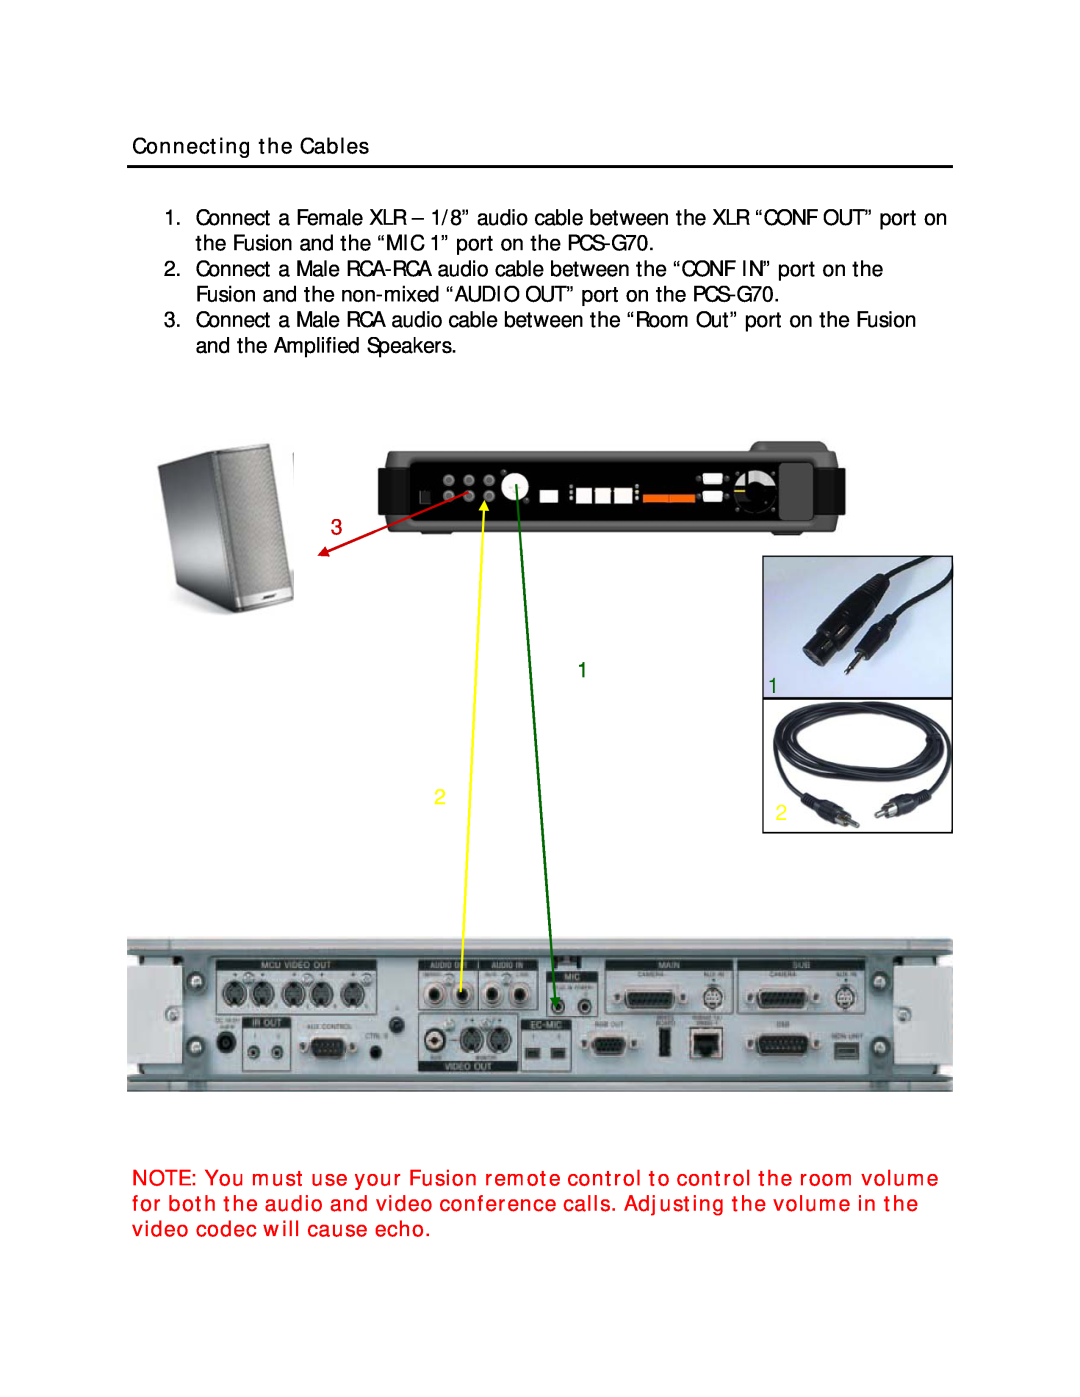 Revolabs sony PCS-G70 setup guide Connecting the Cables 